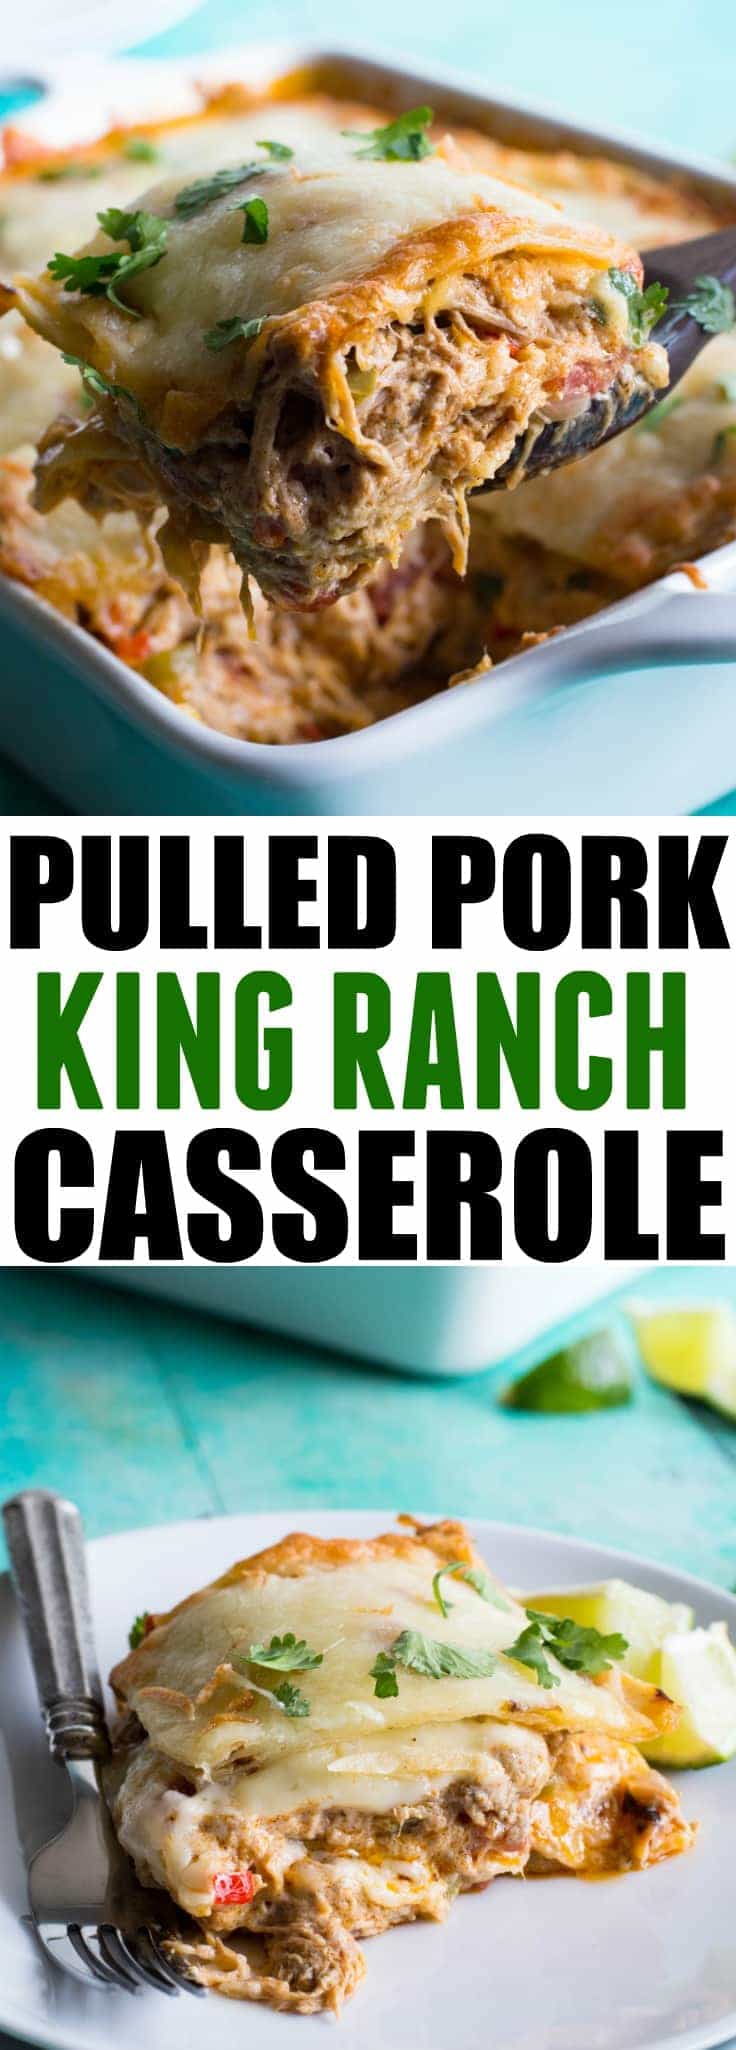 Pulled Pork King Ranch Casserole - House of Yumm